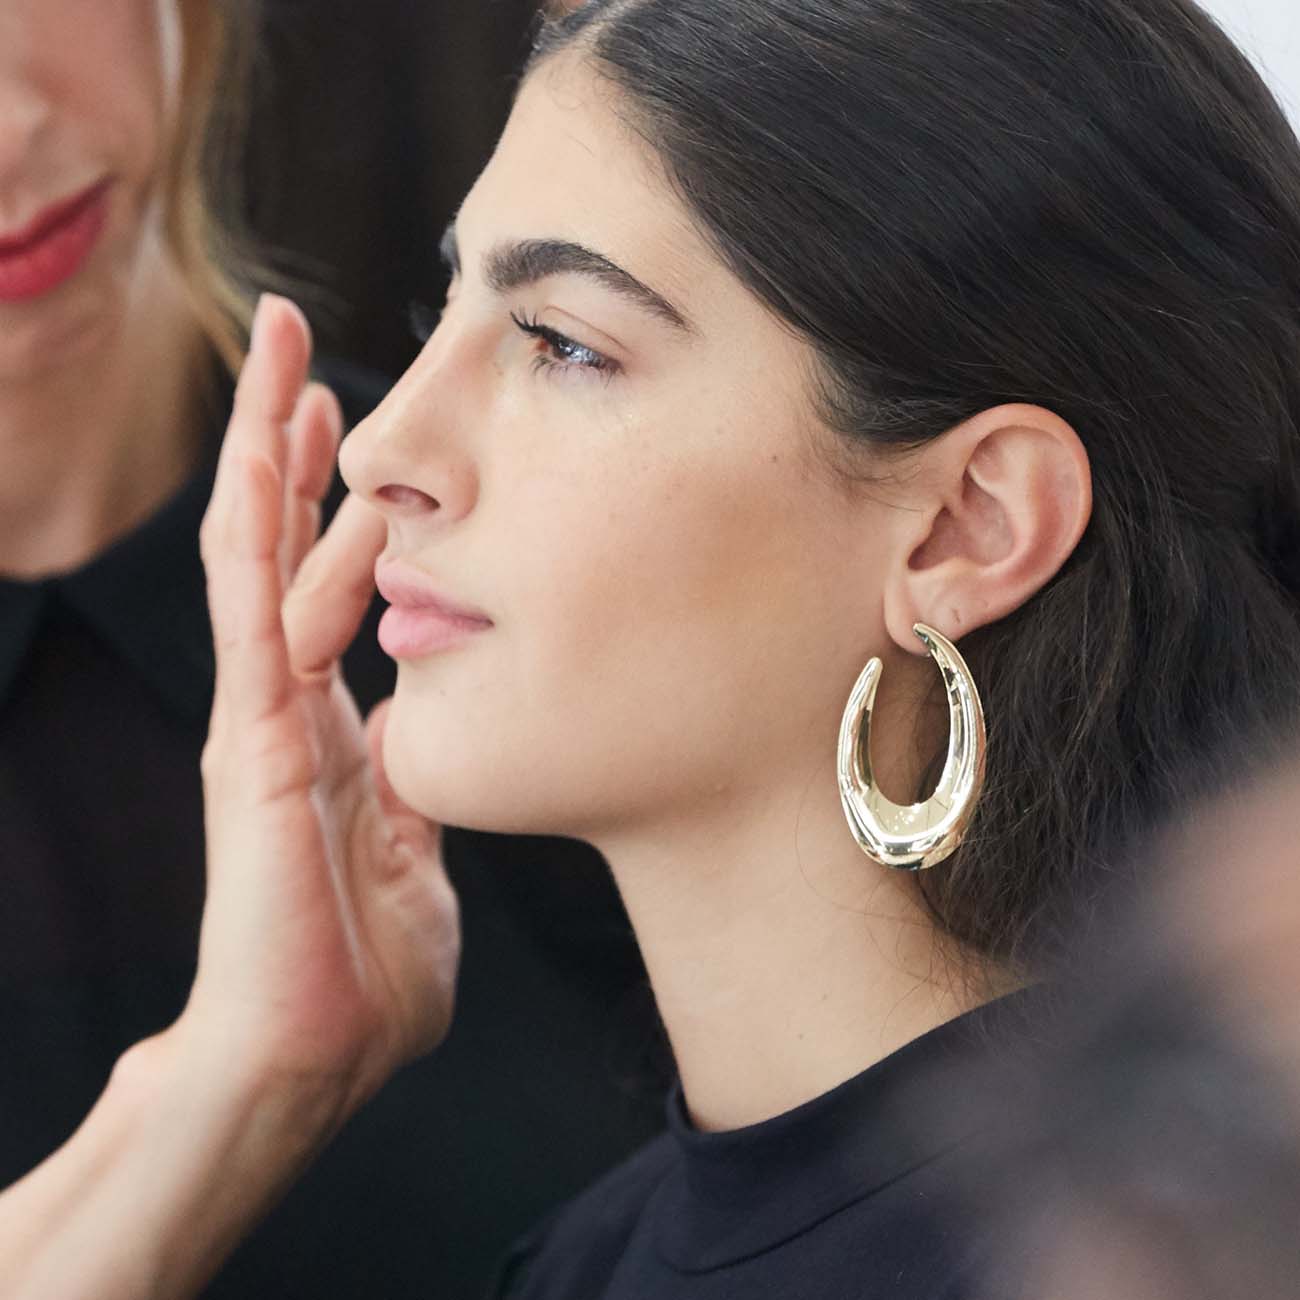 What to Expect Before a Pro Makeup Appointment  POPSUGAR Beauty